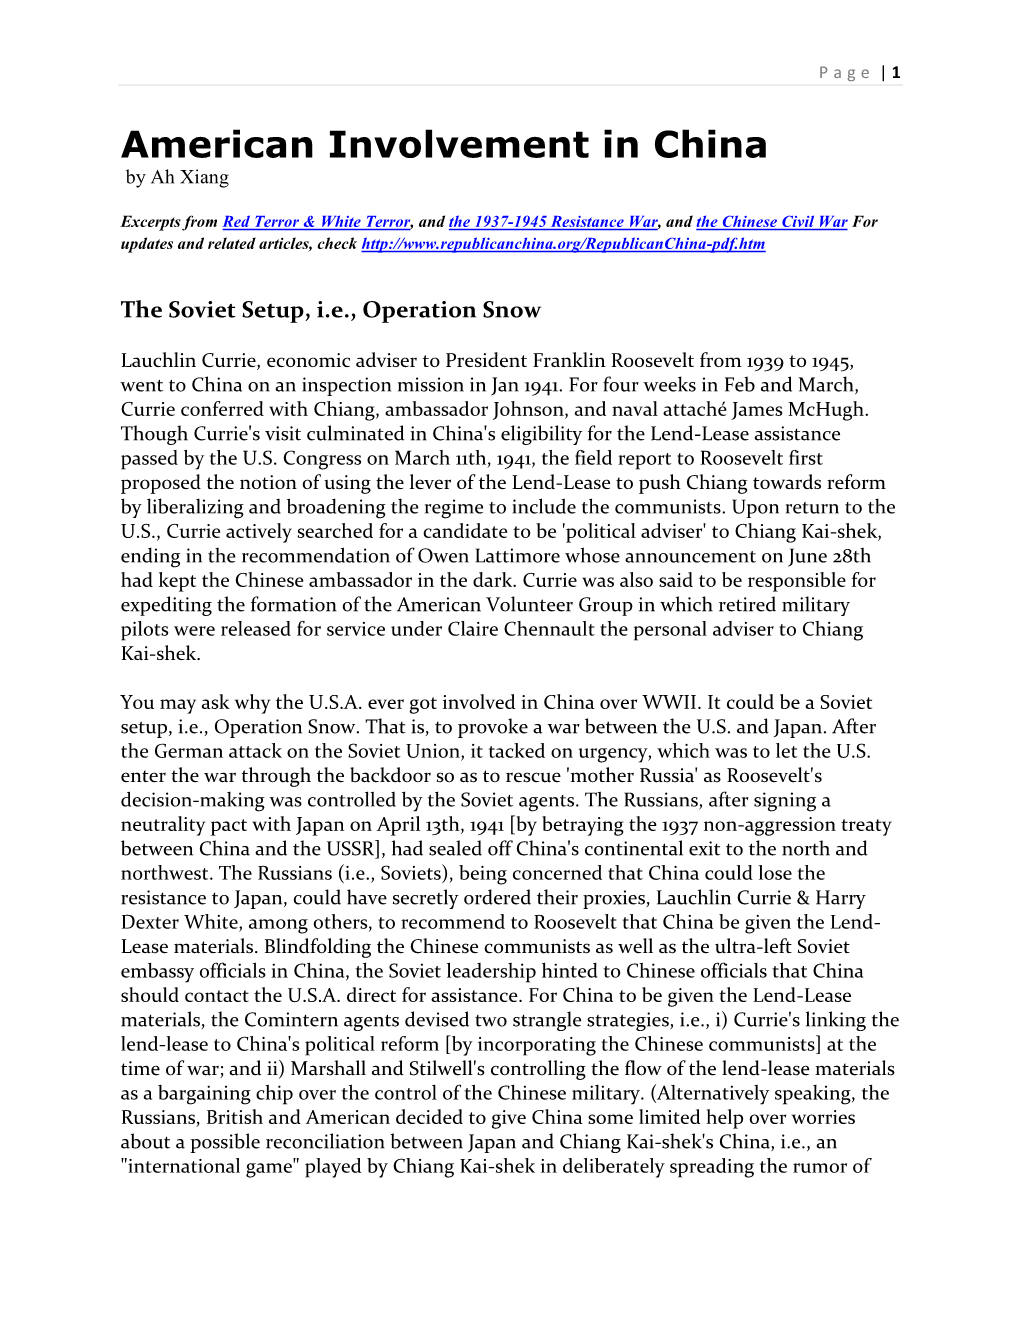 American Involvement in China by Ah Xiang